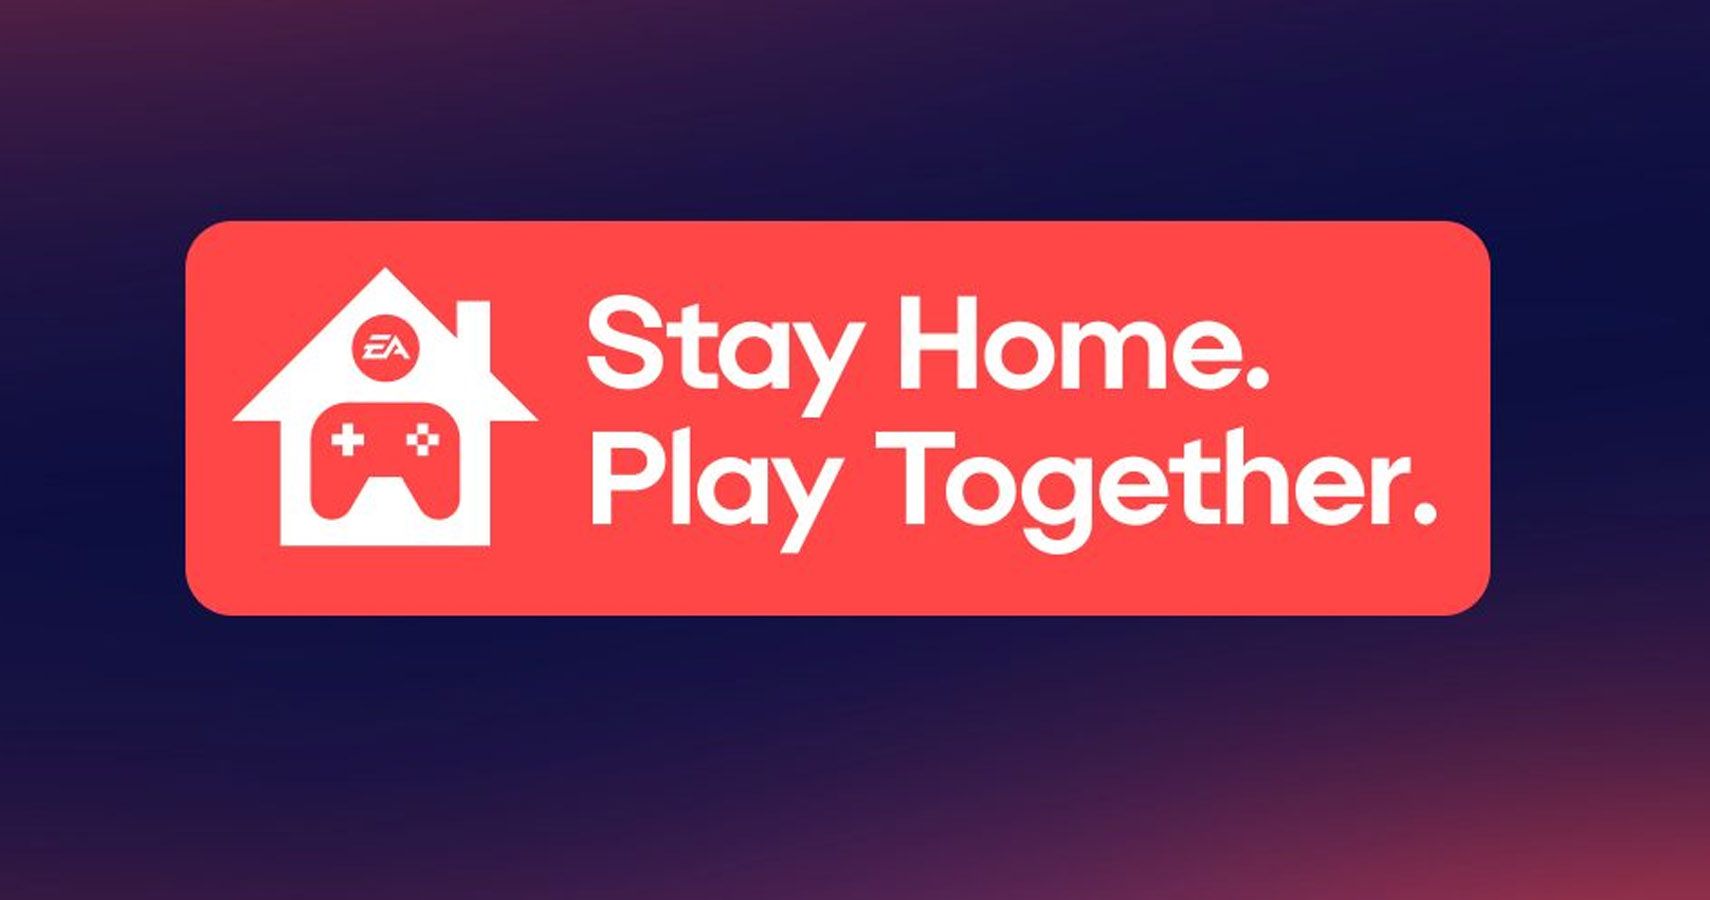 EA Stay Home Play Together campaign branding.